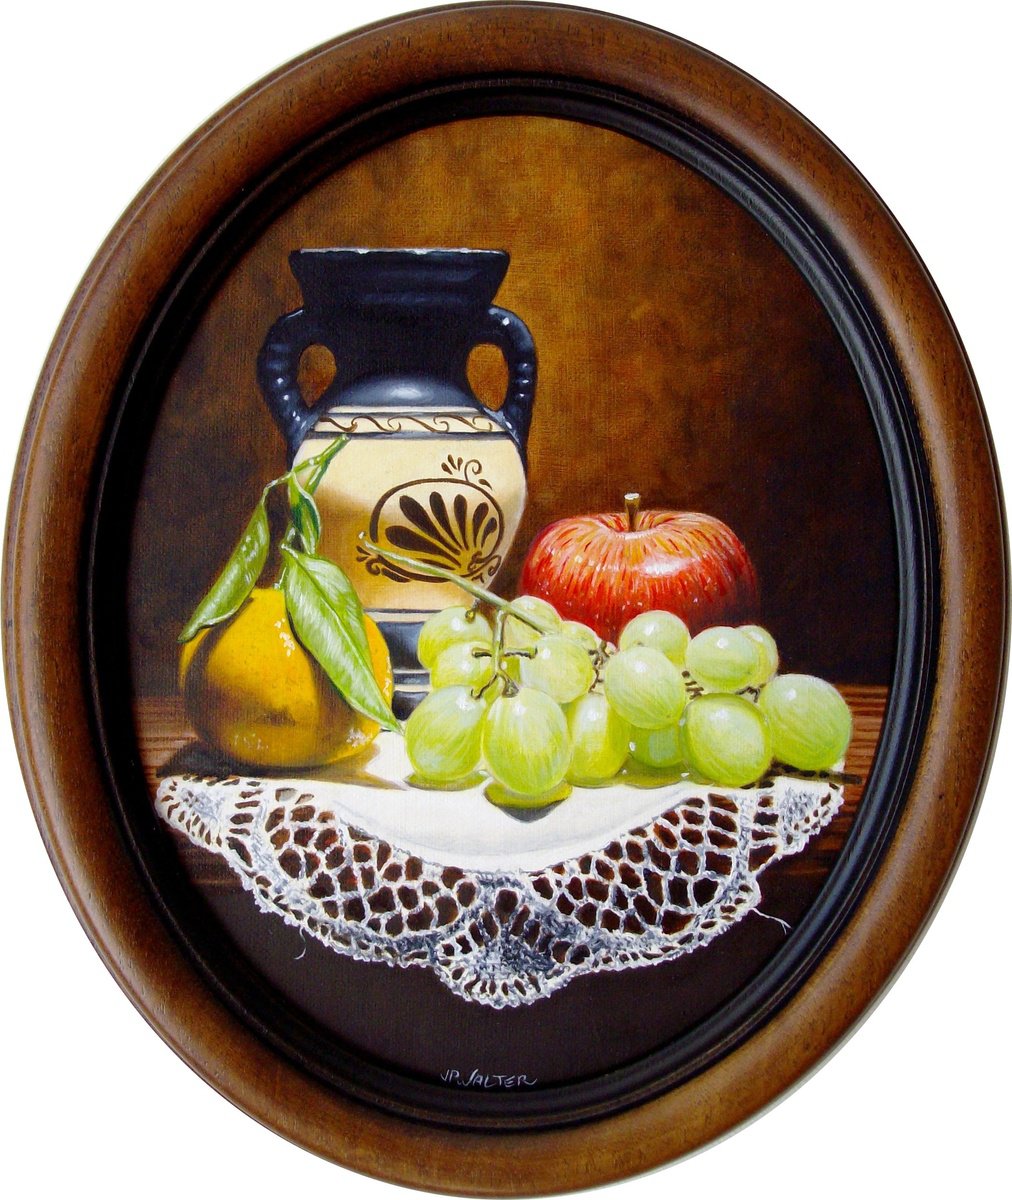 Greek amphora with fruits on lace by Jean-Pierre Walter